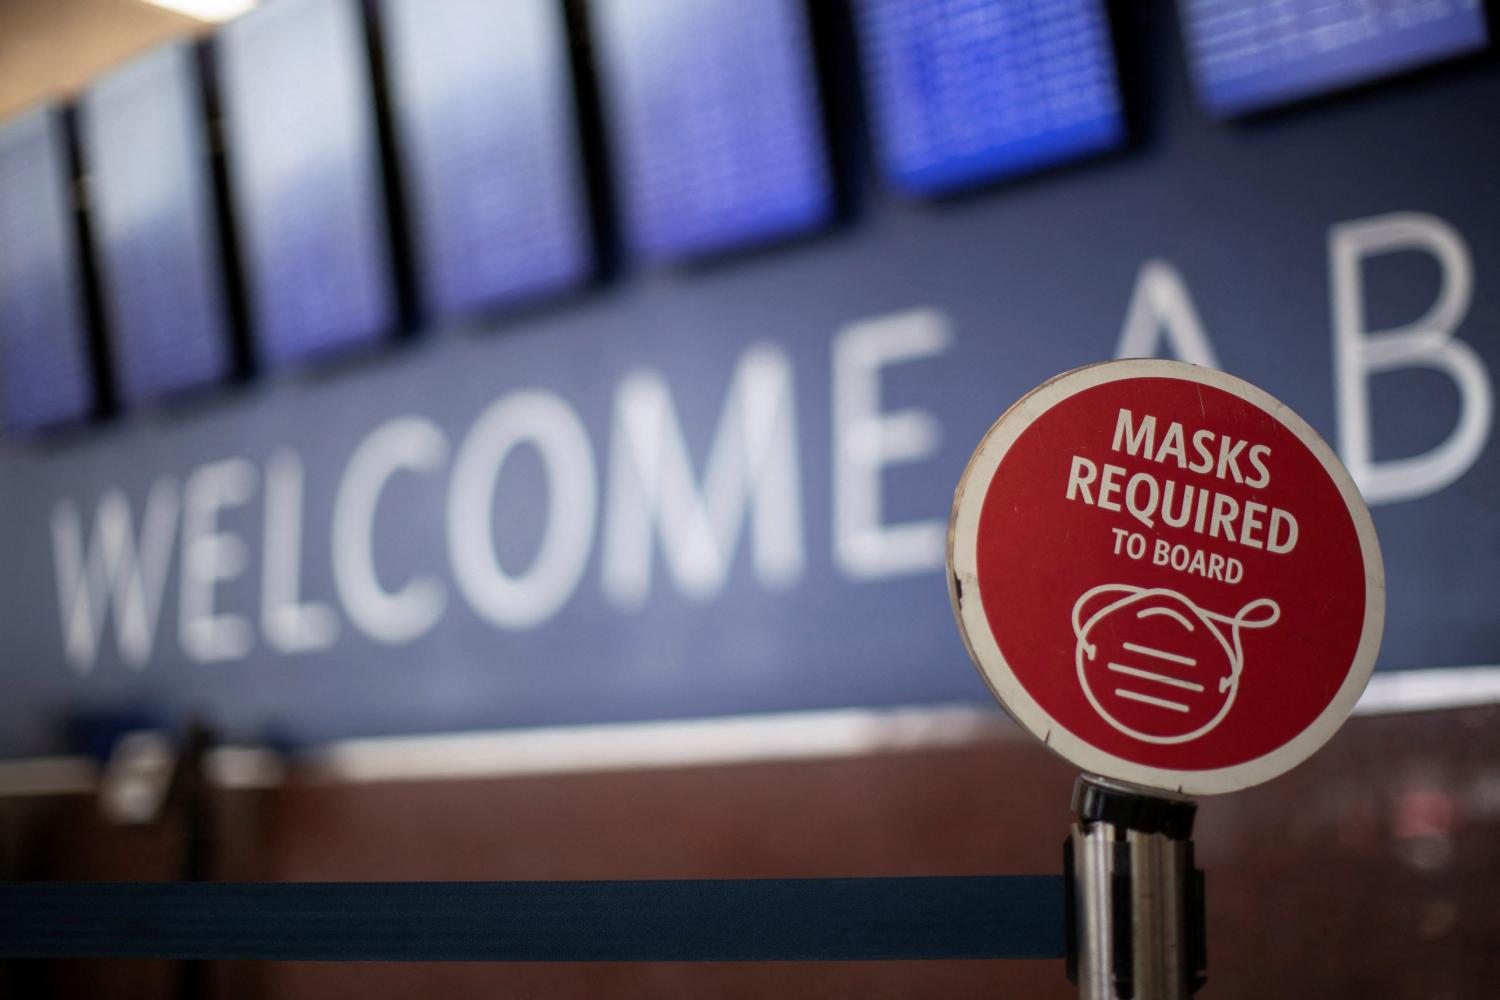 An outdated sign requiring Delta Air Lines passengers to wear a face mask to board a plane is displayed in the domestic terminal of the Hartsfield-Jackson Atlanta International Airport after Biden's administration announced that it will no longer enforce a U.S. mask mandate on public transportation, following a Florida court ruling, in Atlanta, Georgia, U.S., April 19, 2022.  REUTERS/Alyssa Pointer